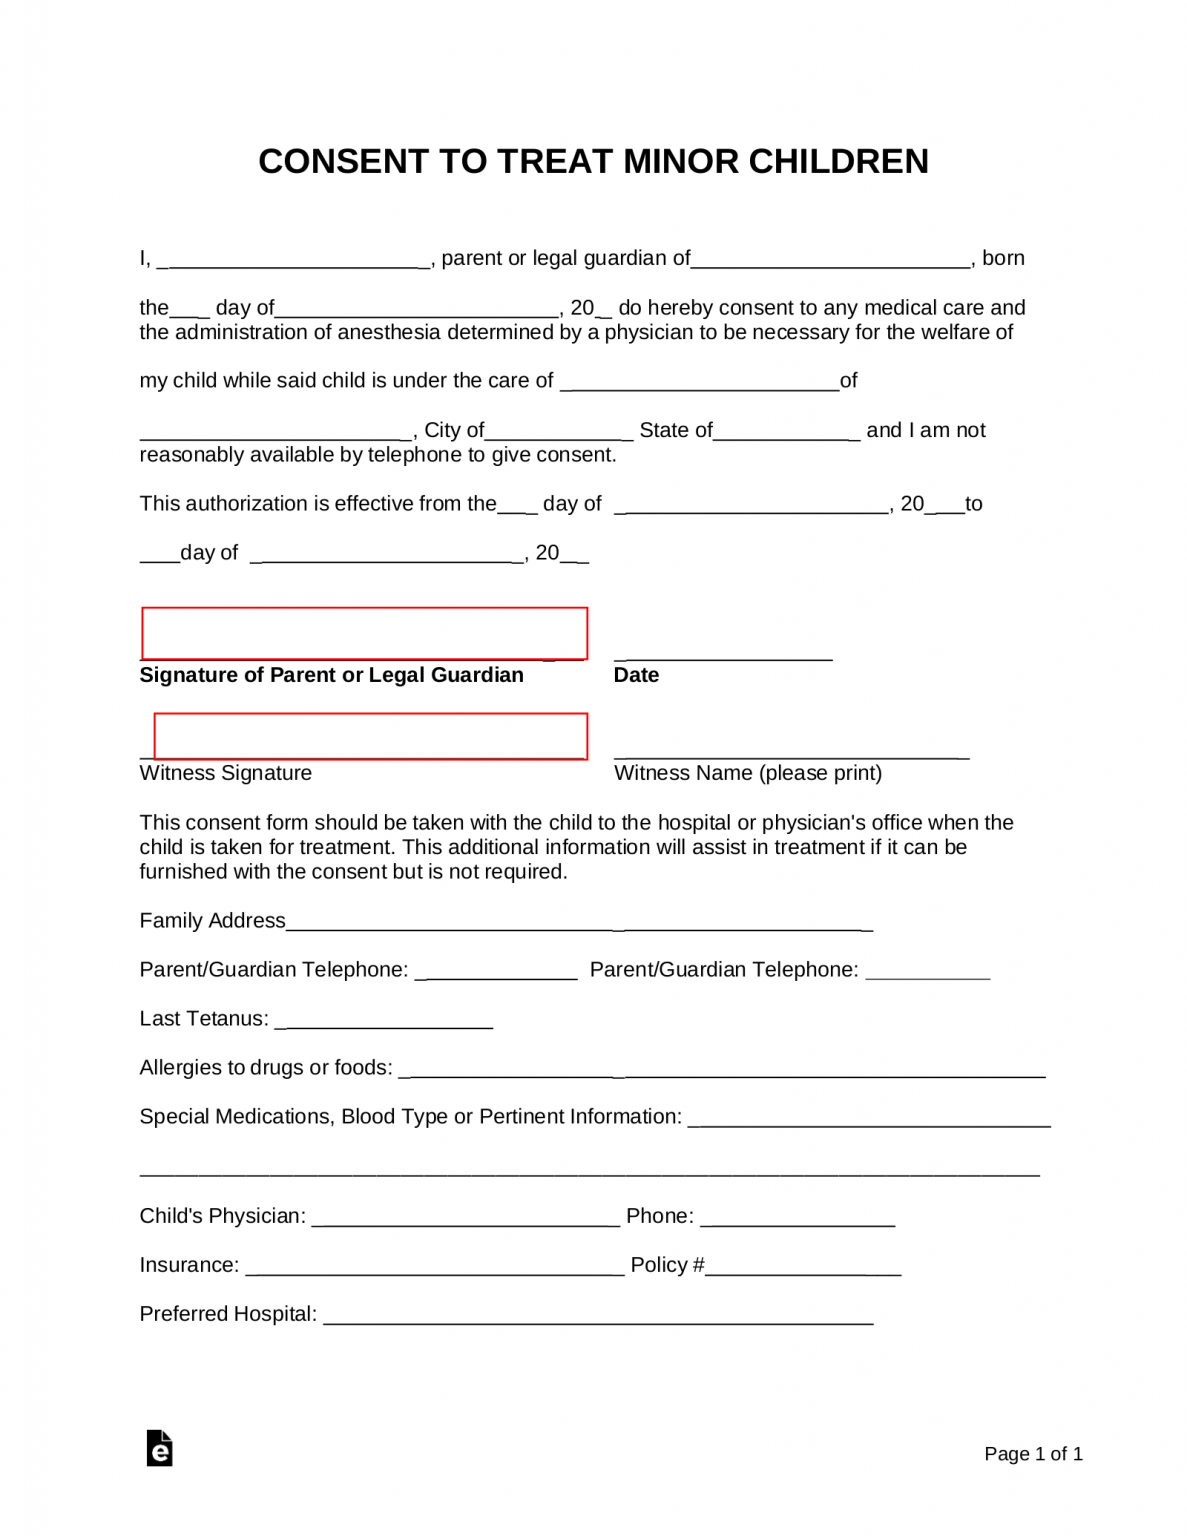 Notary Printable Child Travel Consent Form